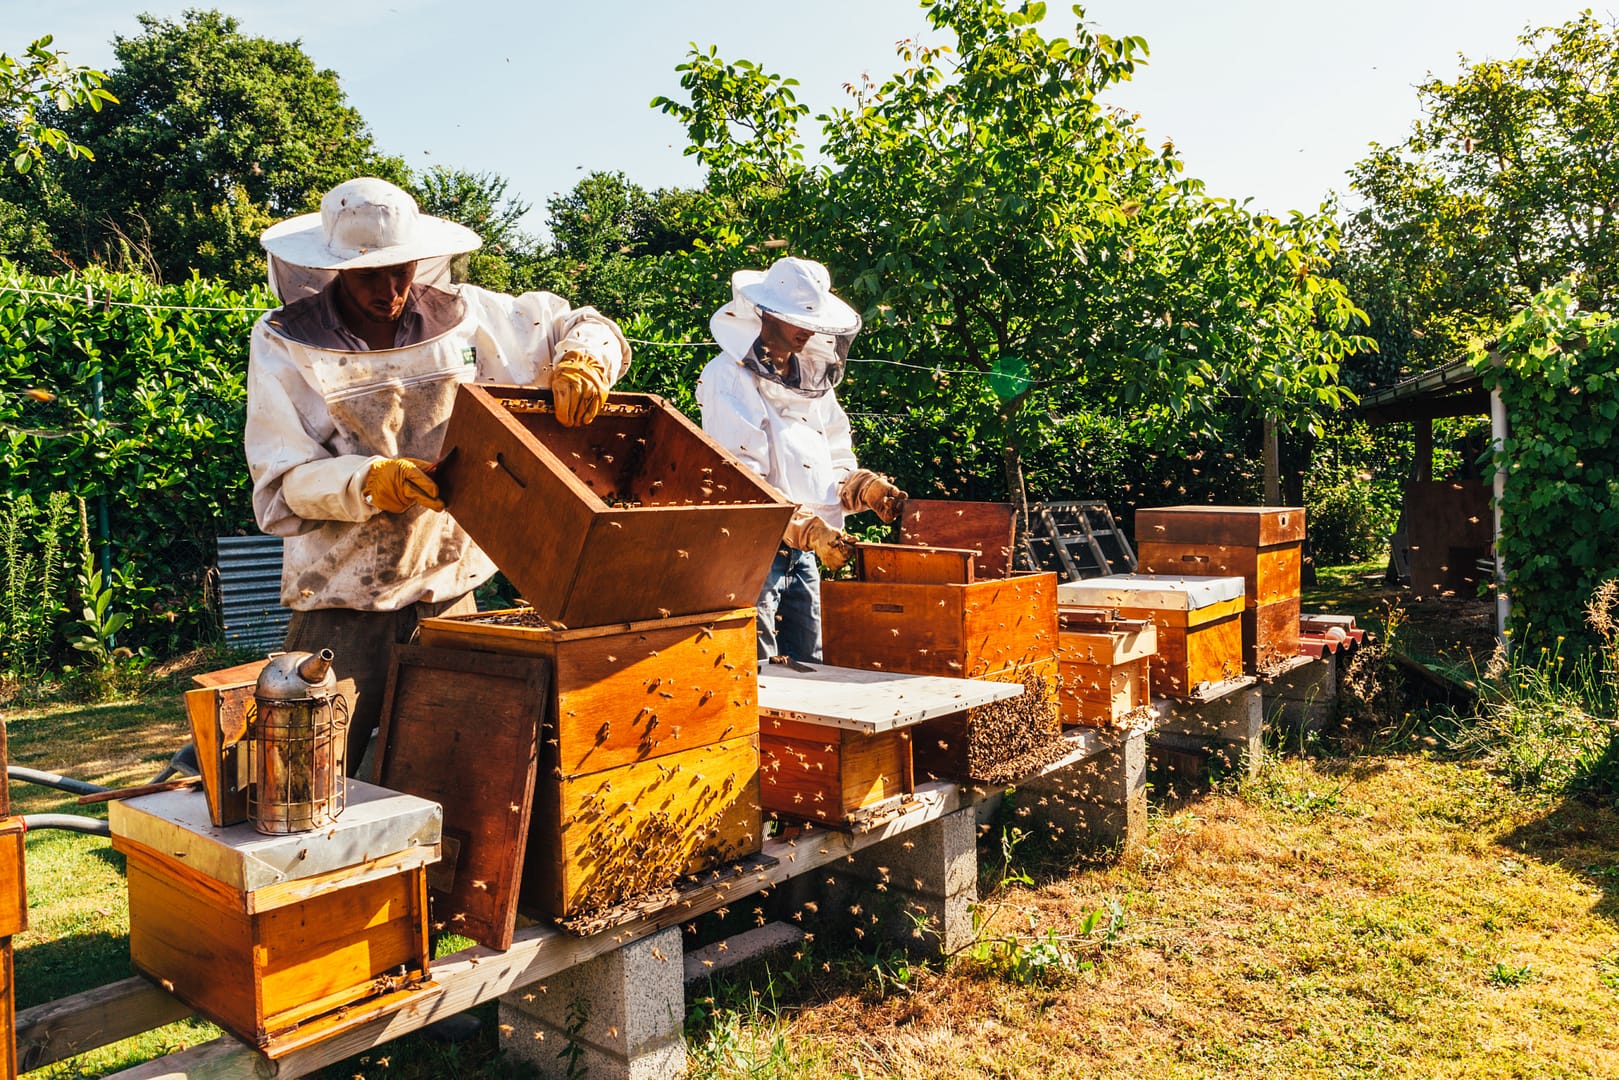 Two beekeepers in protective gear harvesting honey from beehives next to an orchard of trees